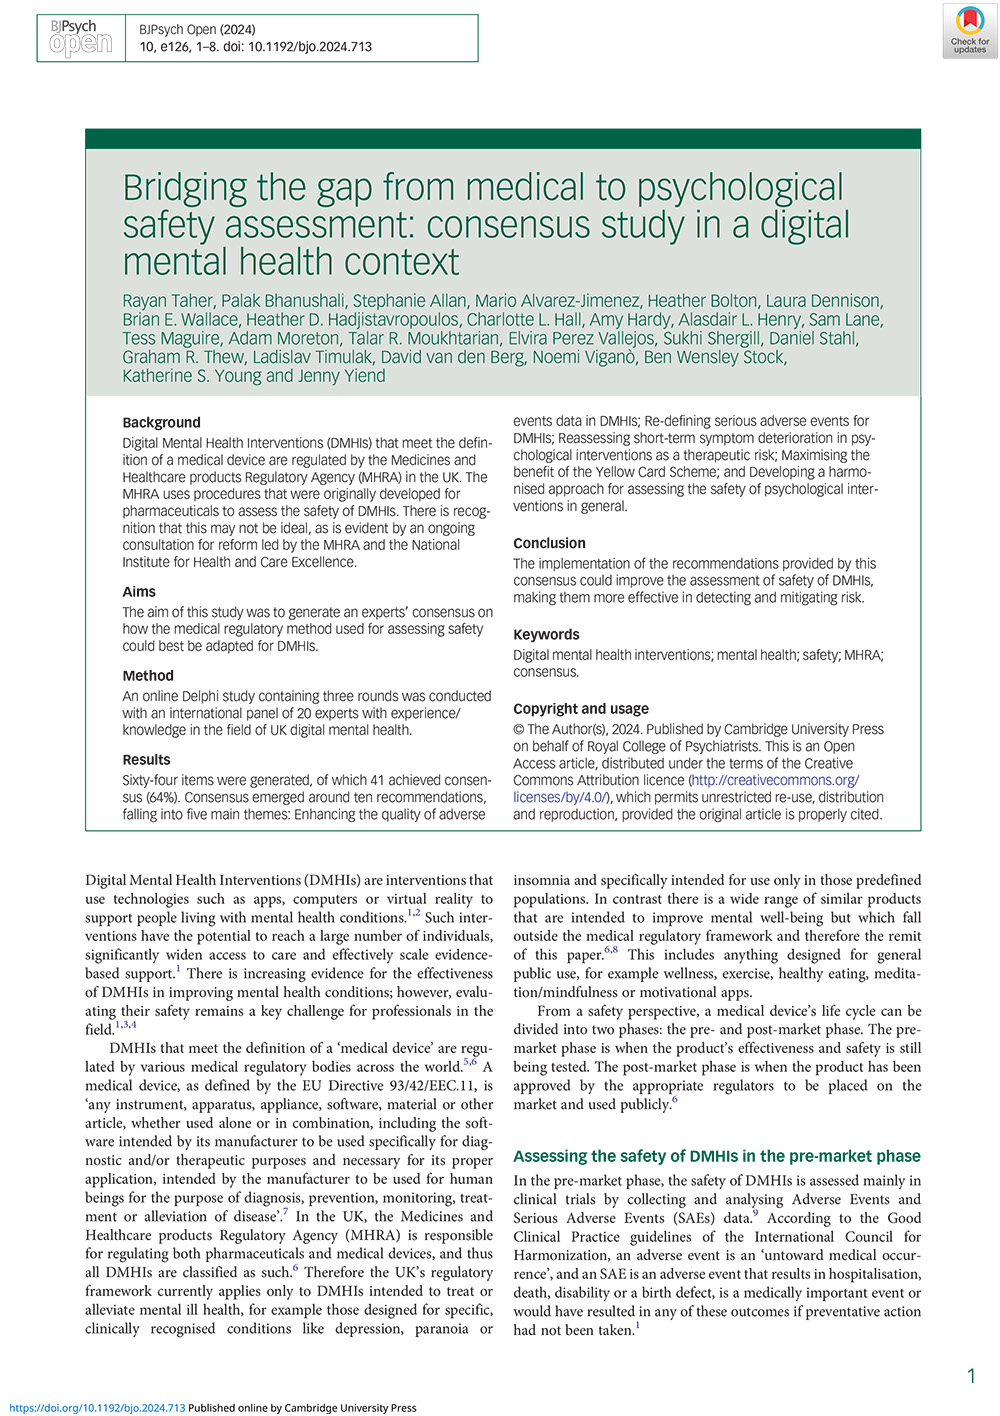 bridging-the-gap-from-medical-to-psychological-safety-assessment-consensus-study-in-a-digital-mental-health-context-1